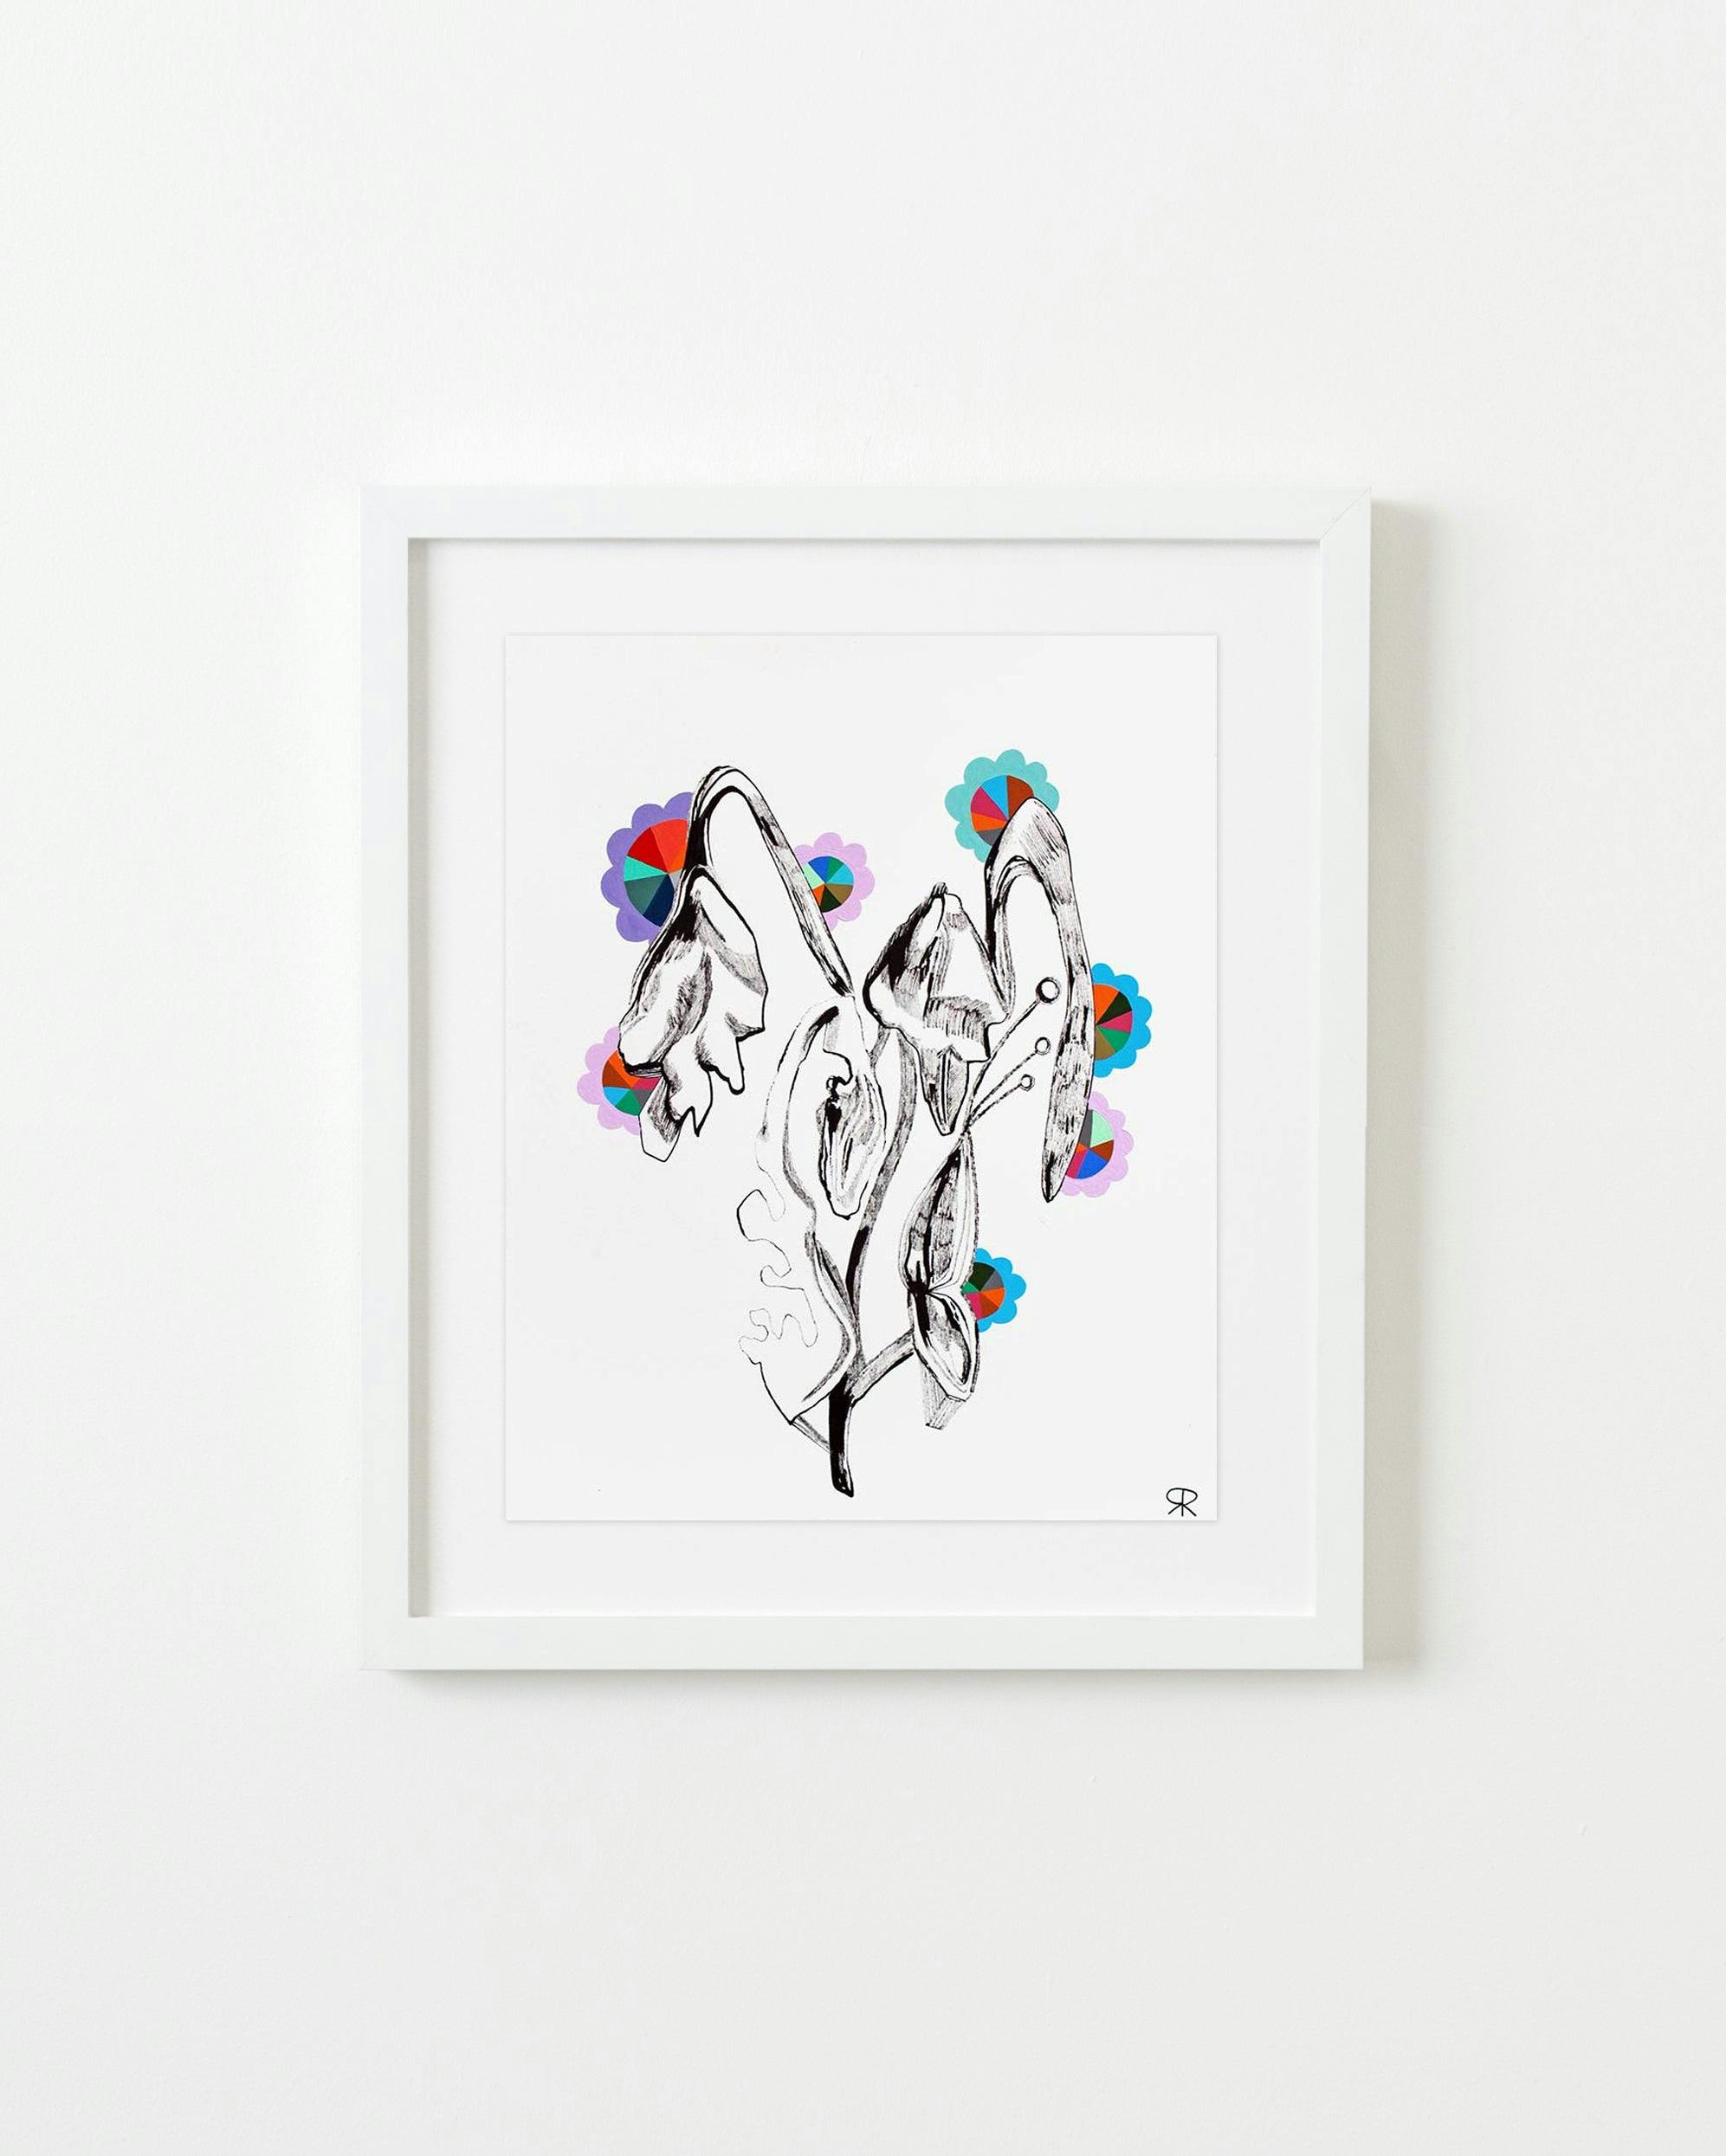 Drawing by Rebeca Raney titled "Flower Drawing #12".